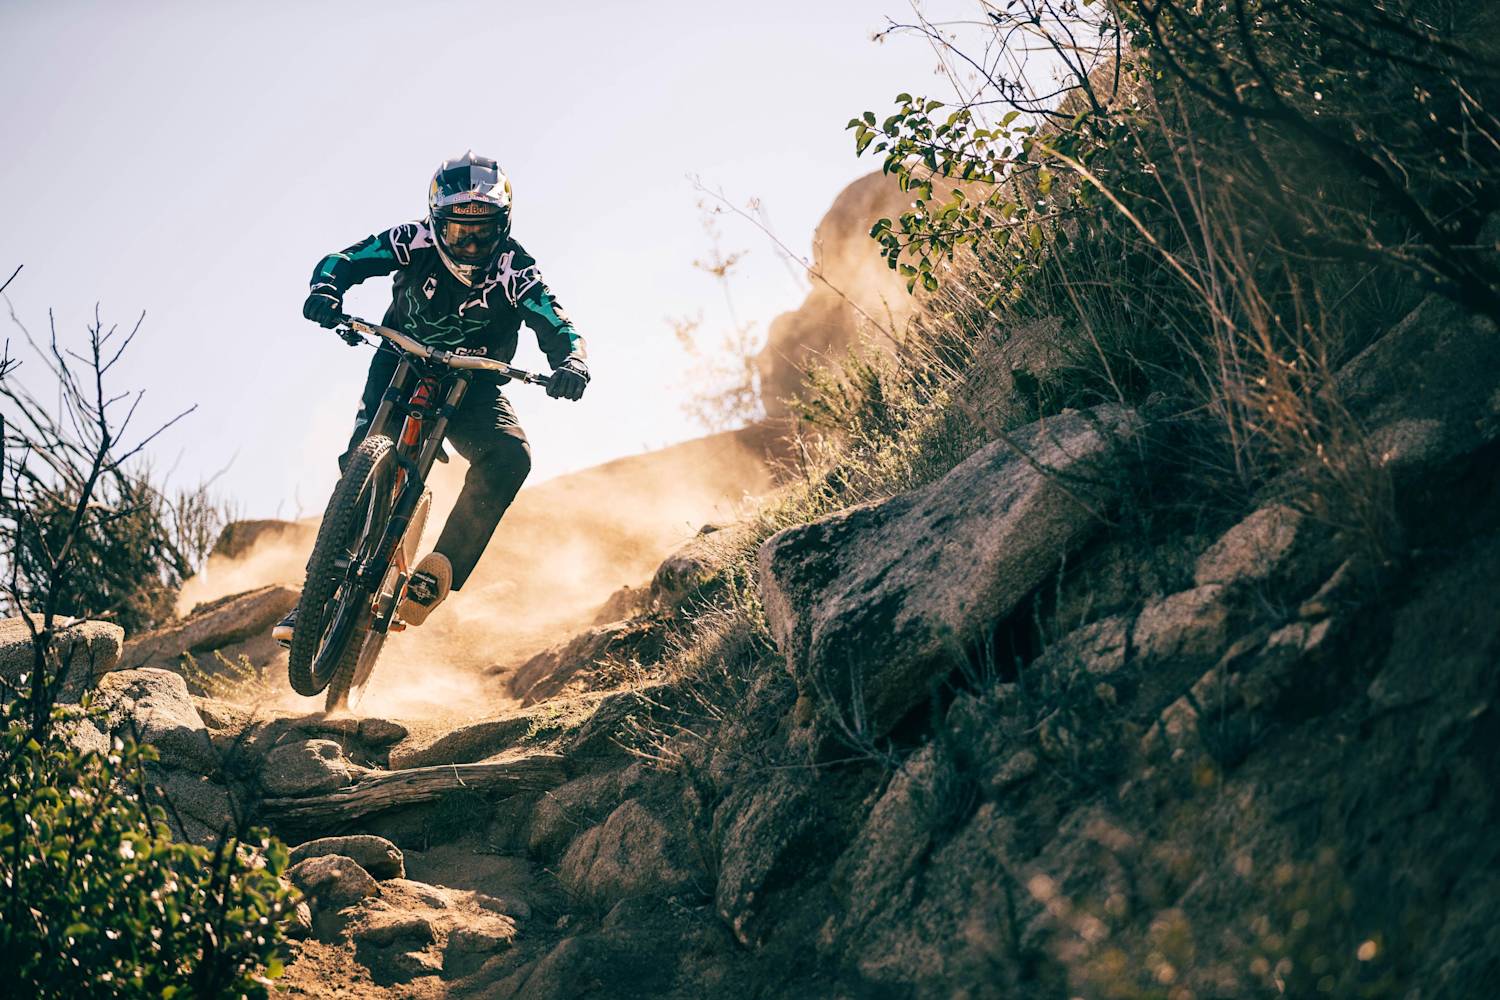 Best downhill mountain bikes 2020: These are the top 10